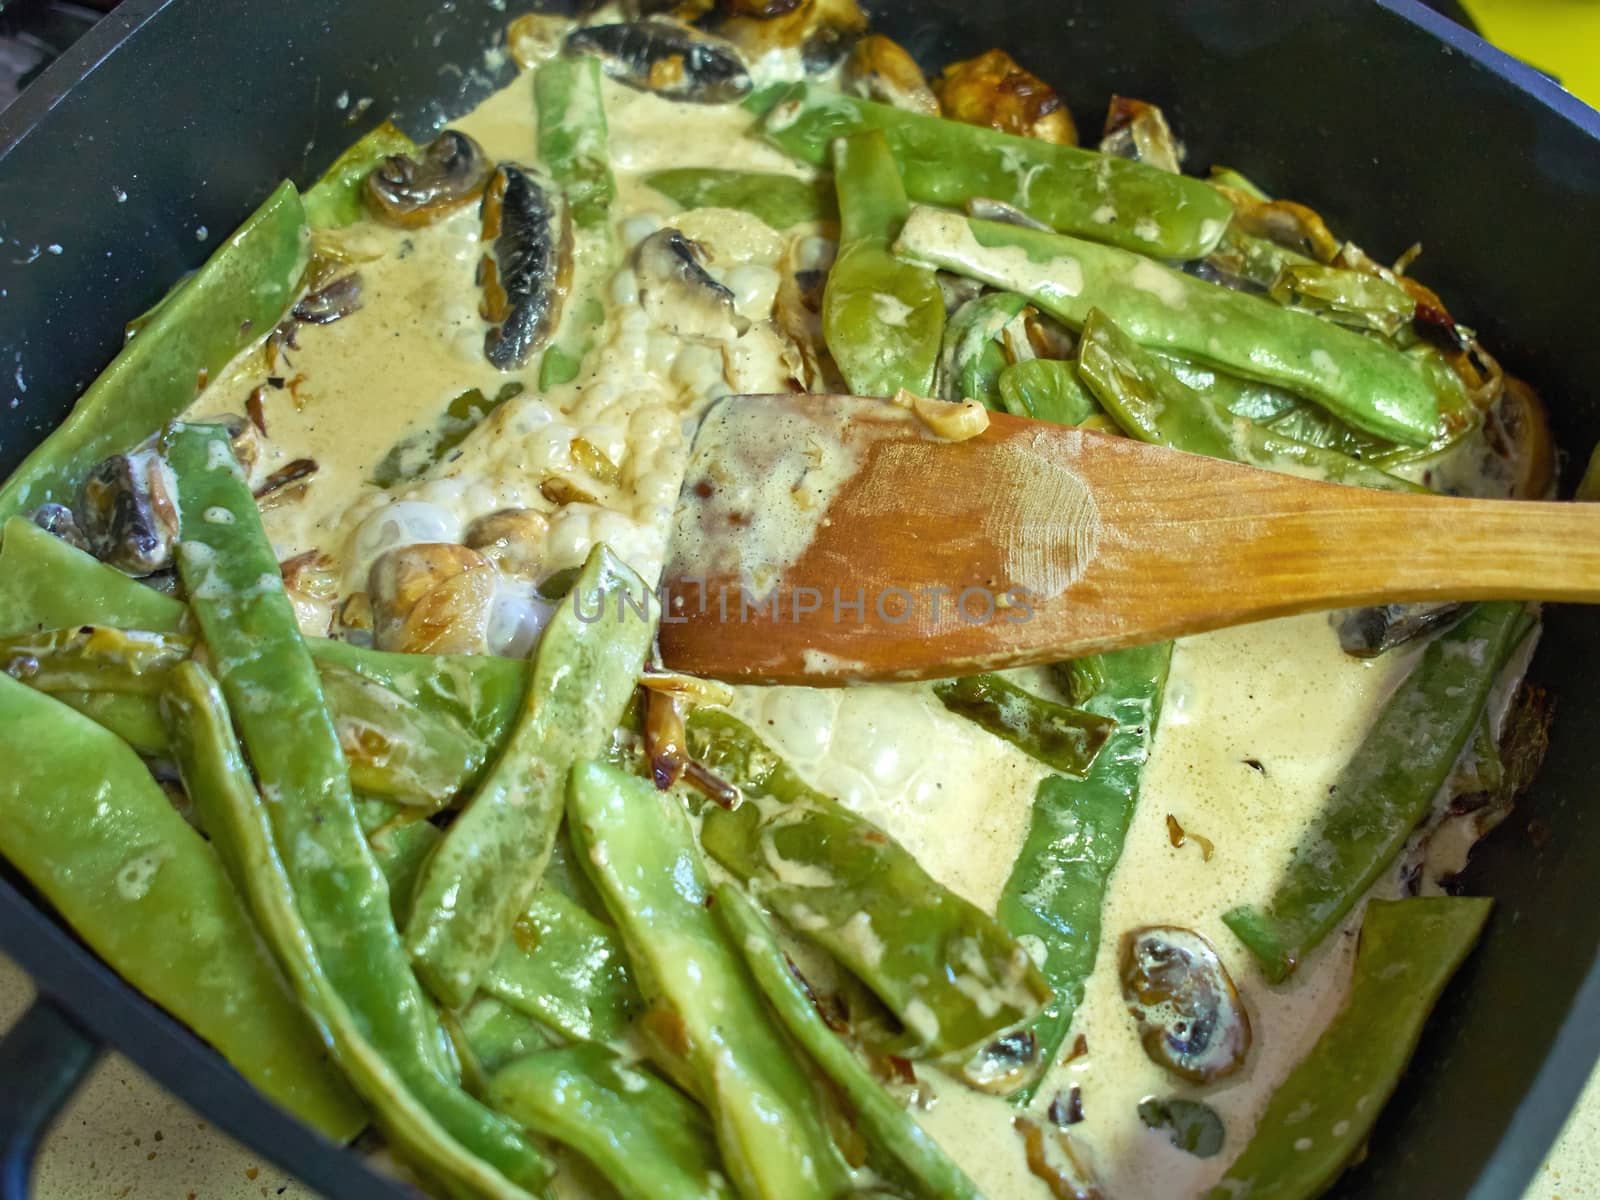 Green beans and mushrooms cooking in skillet by Ronyzmbow